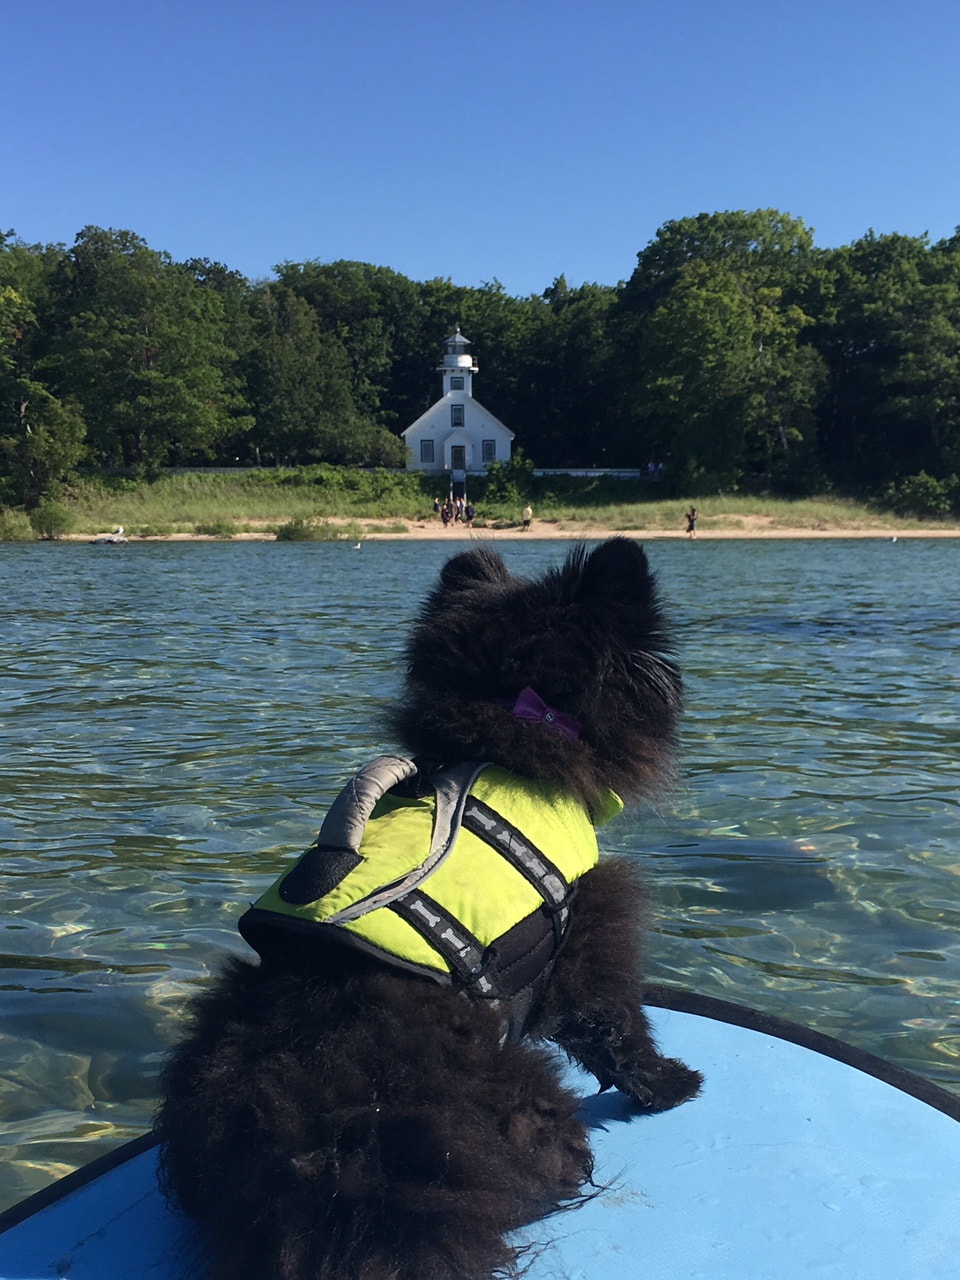 Small black dog in life jacket on paddle board looking at lighthouse from water